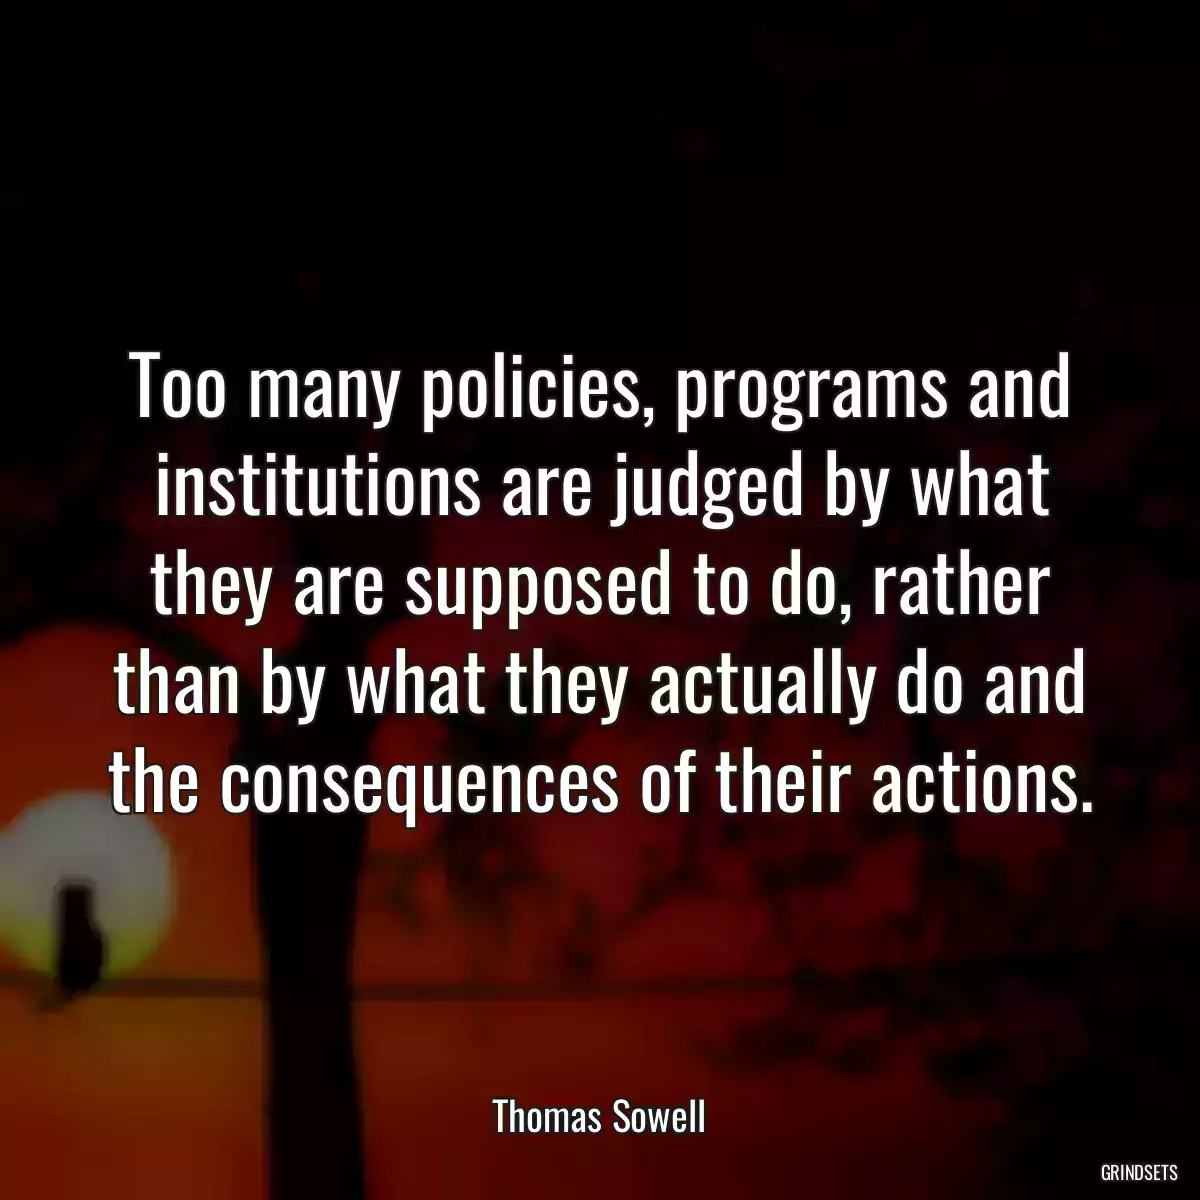 Too many policies, programs and institutions are judged by what they are supposed to do, rather than by what they actually do and the consequences of their actions.